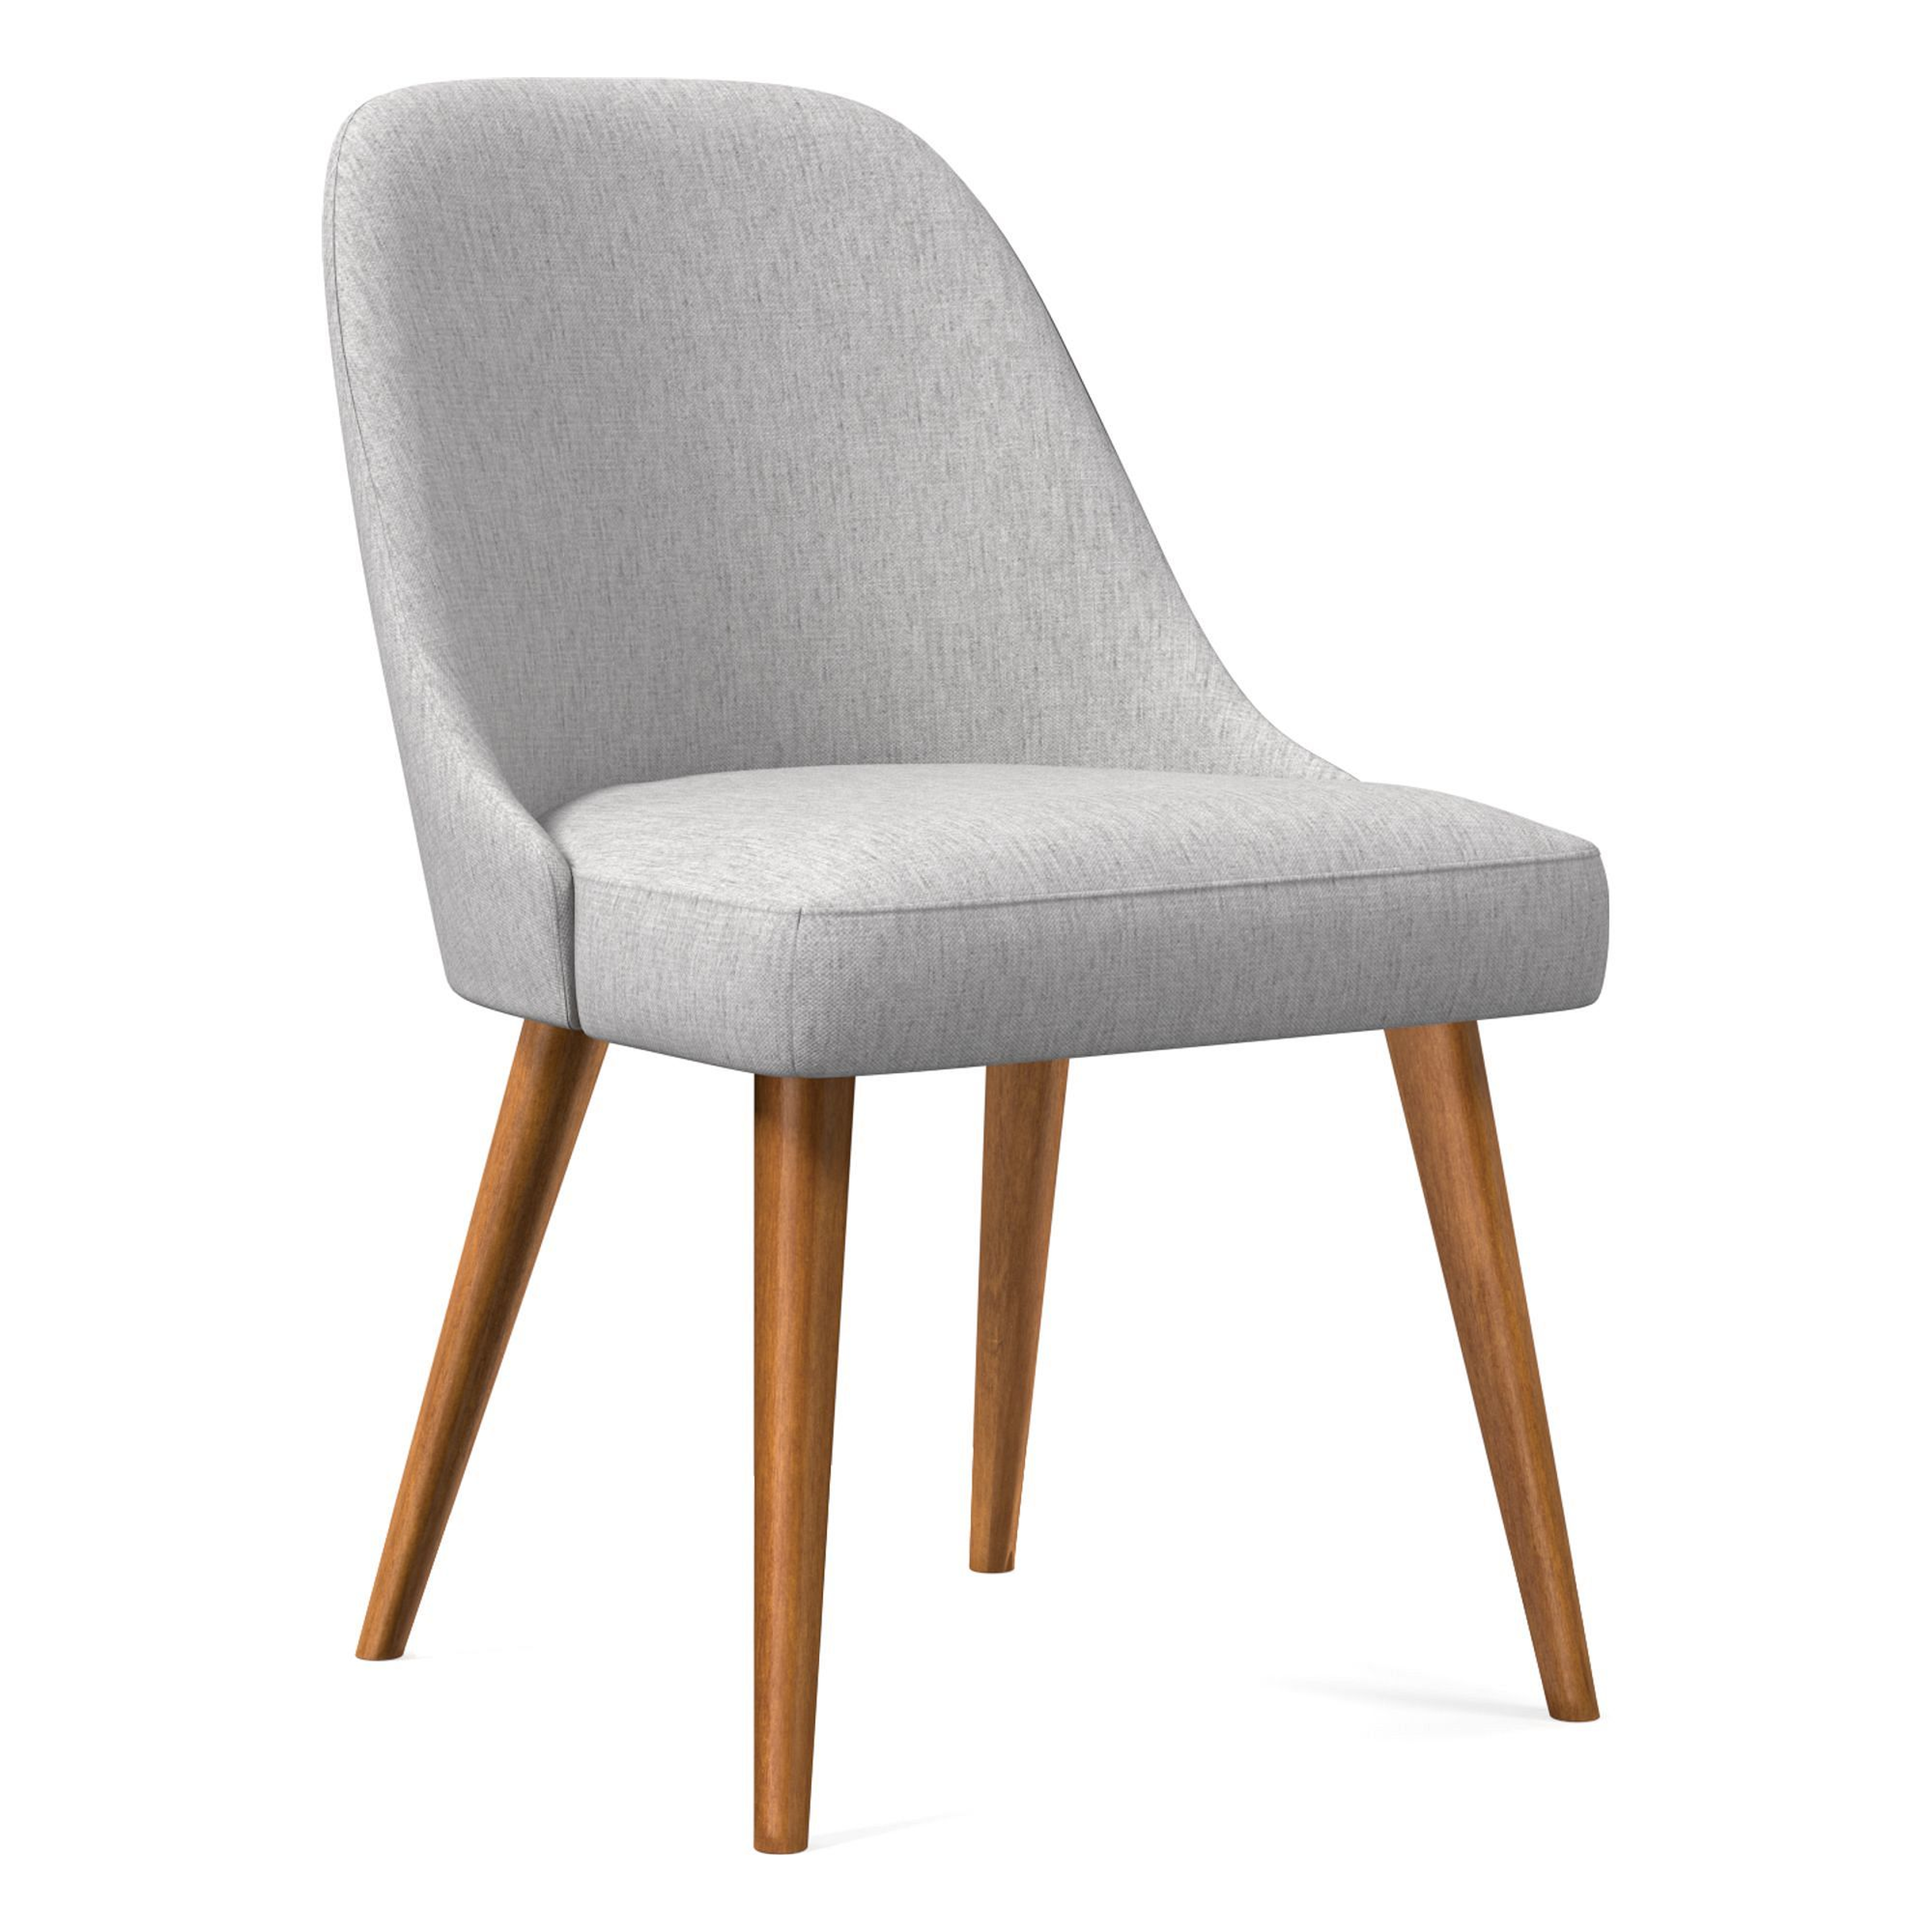 Mid-Century Upholstered Dining Chair - Wood Legs - West Elm